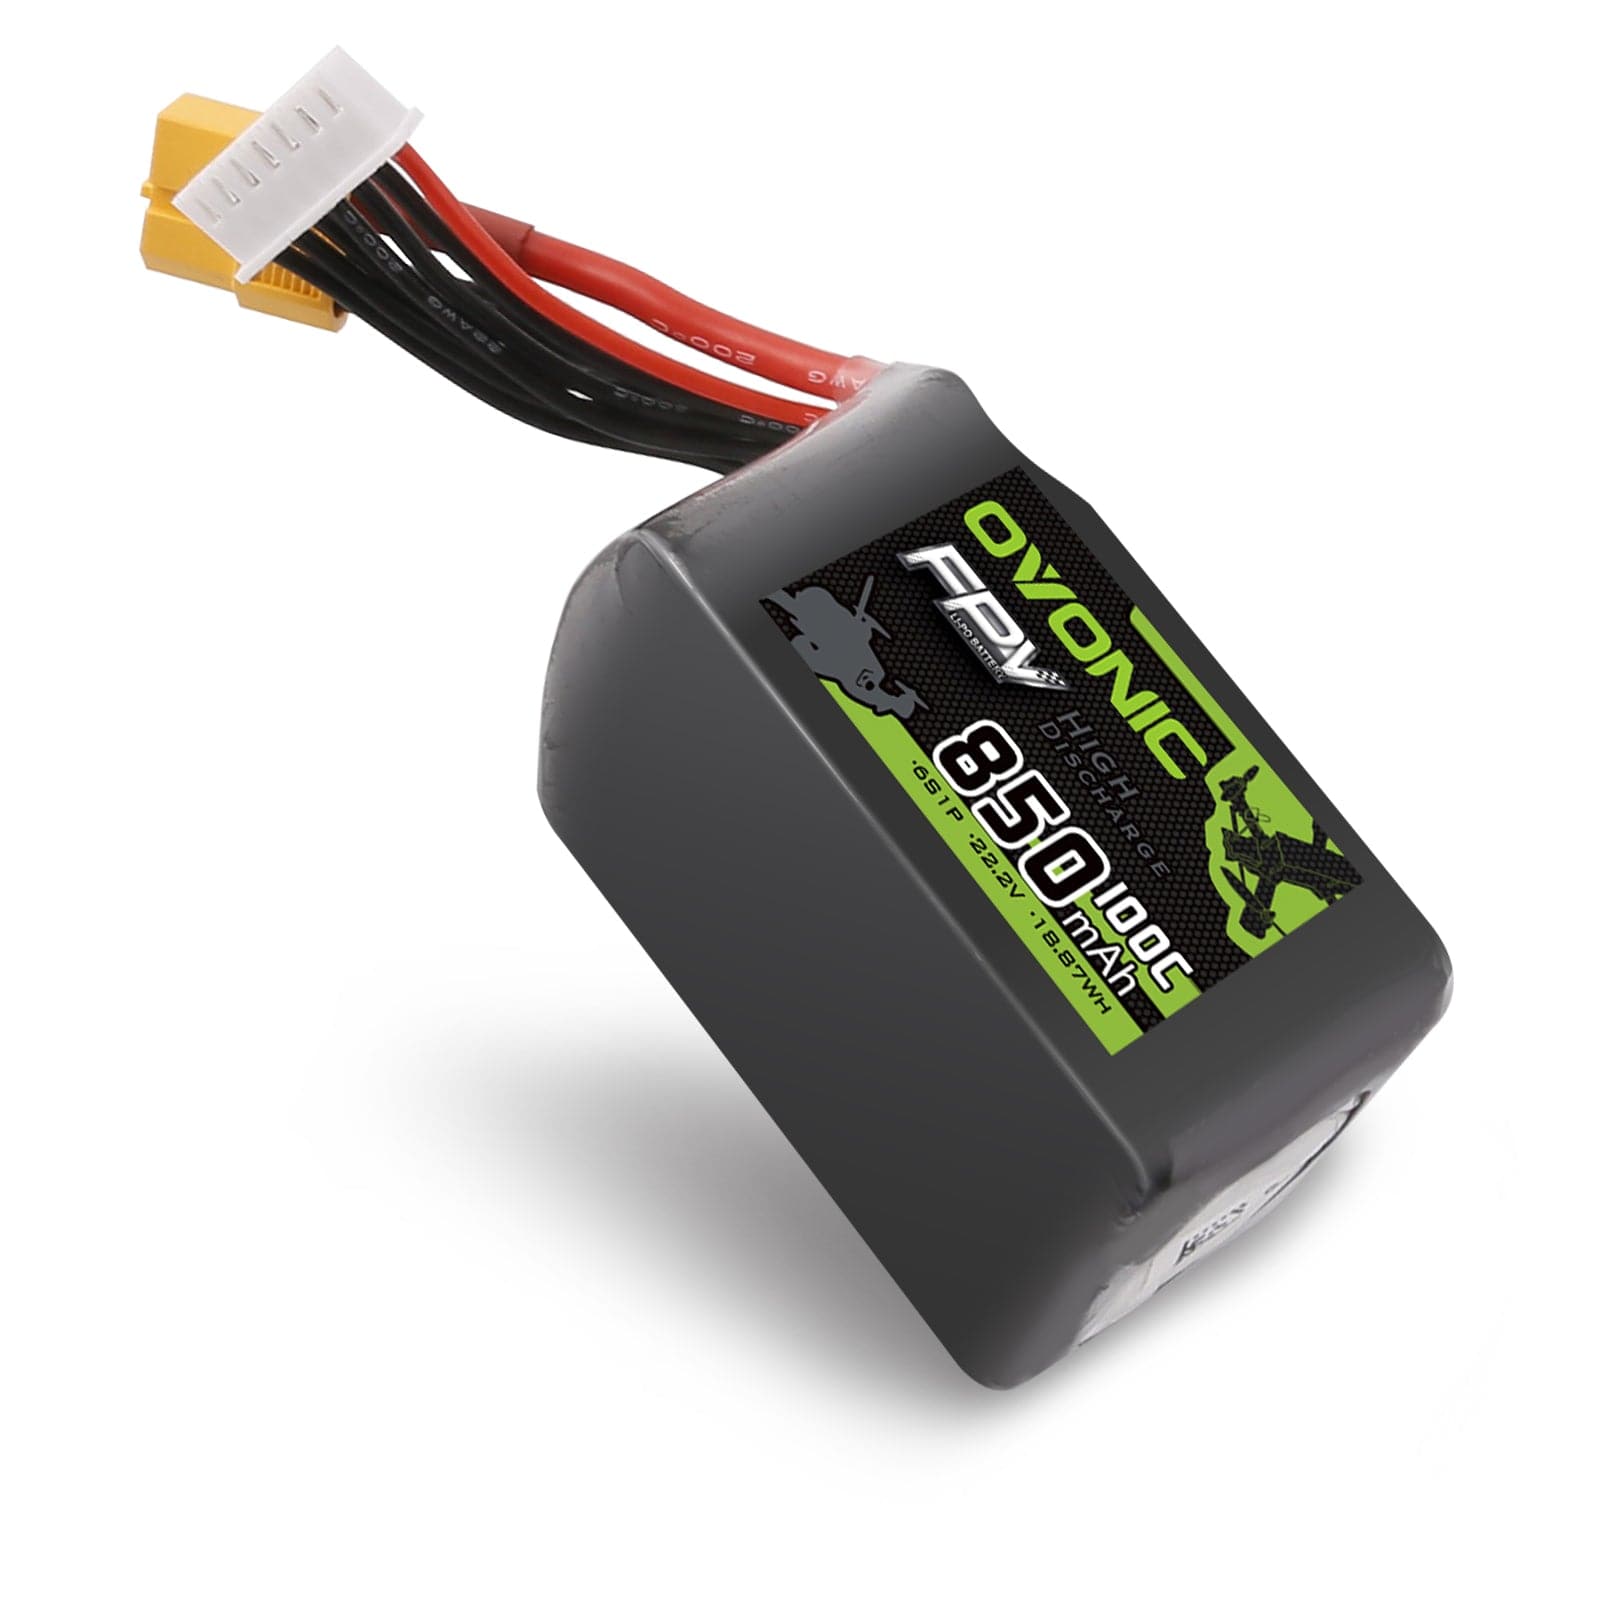 2x Ovonic 100C 6S 850mah Lipo Battery 22.2V Pack with XT60 Plug for fpv